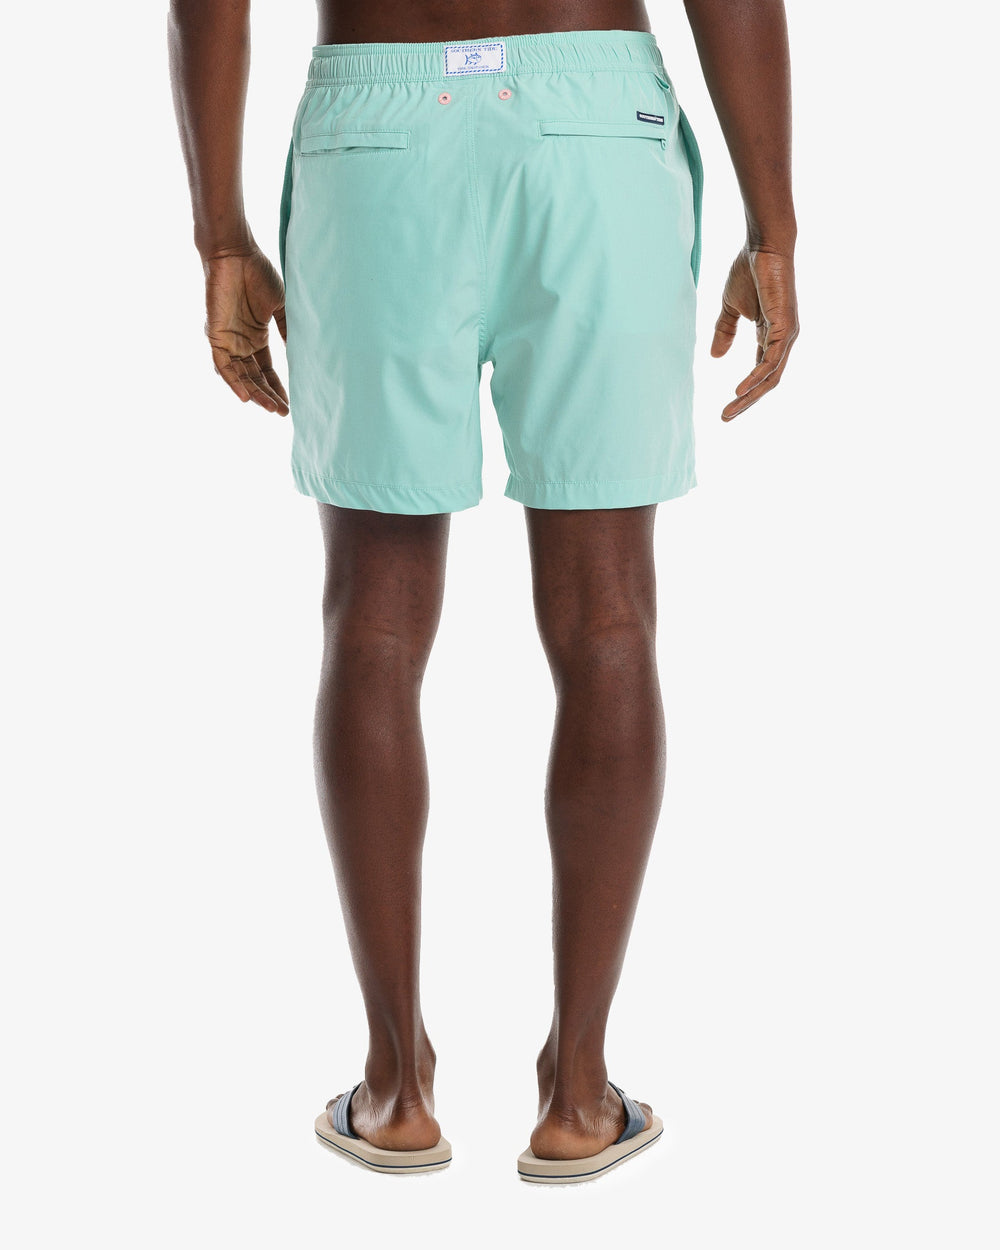 The model back view of the Men's Solid Swim Trunk by Southern Tide - Isle of Pines